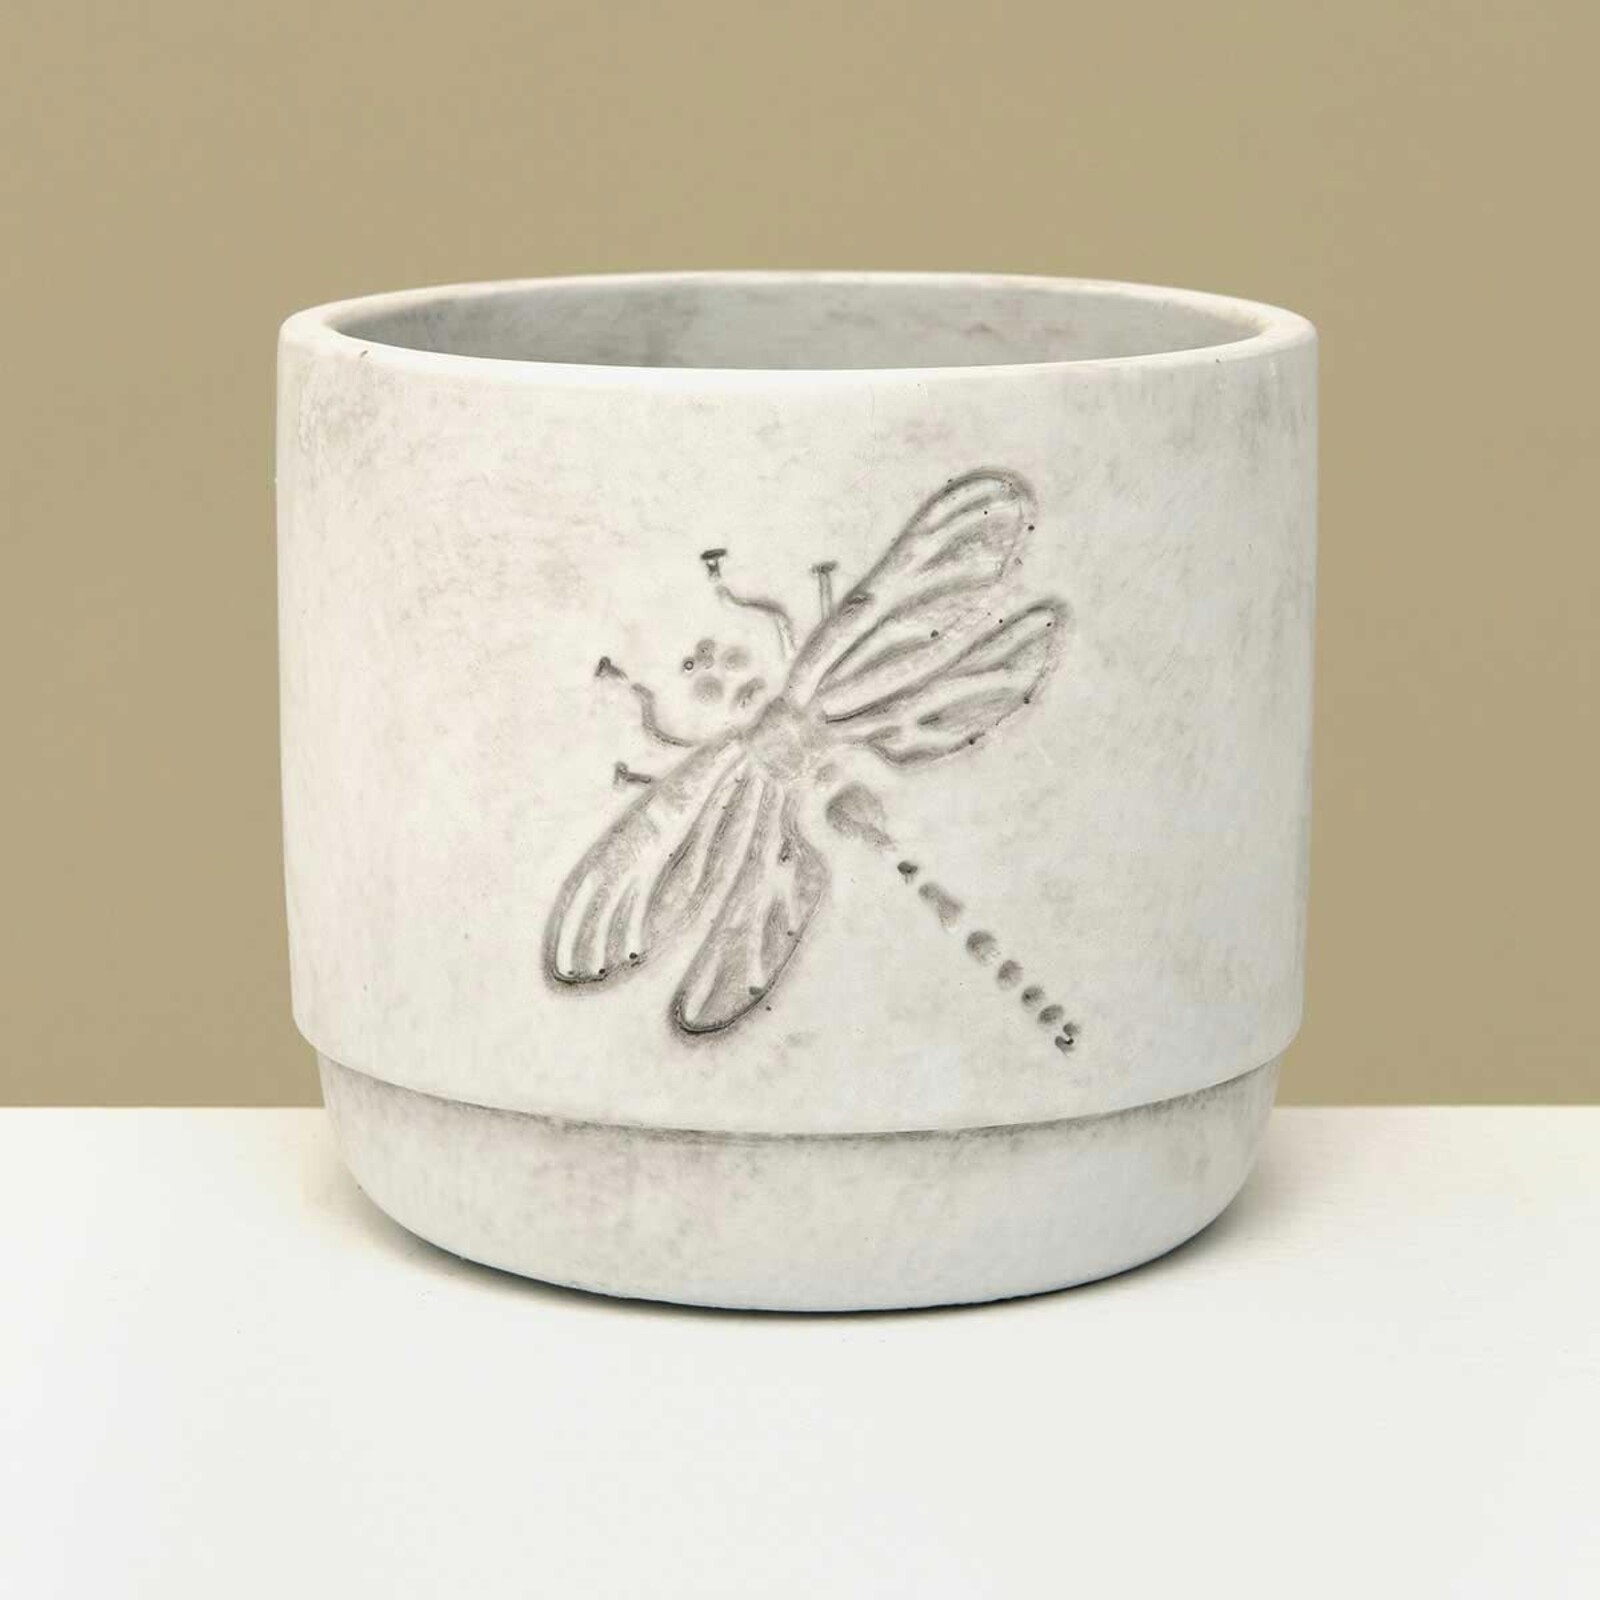 Meravic POT DRAGONFLY WHITE WASH SMALL 4.75IN X 4IN CONCRETE   A3565 loading=